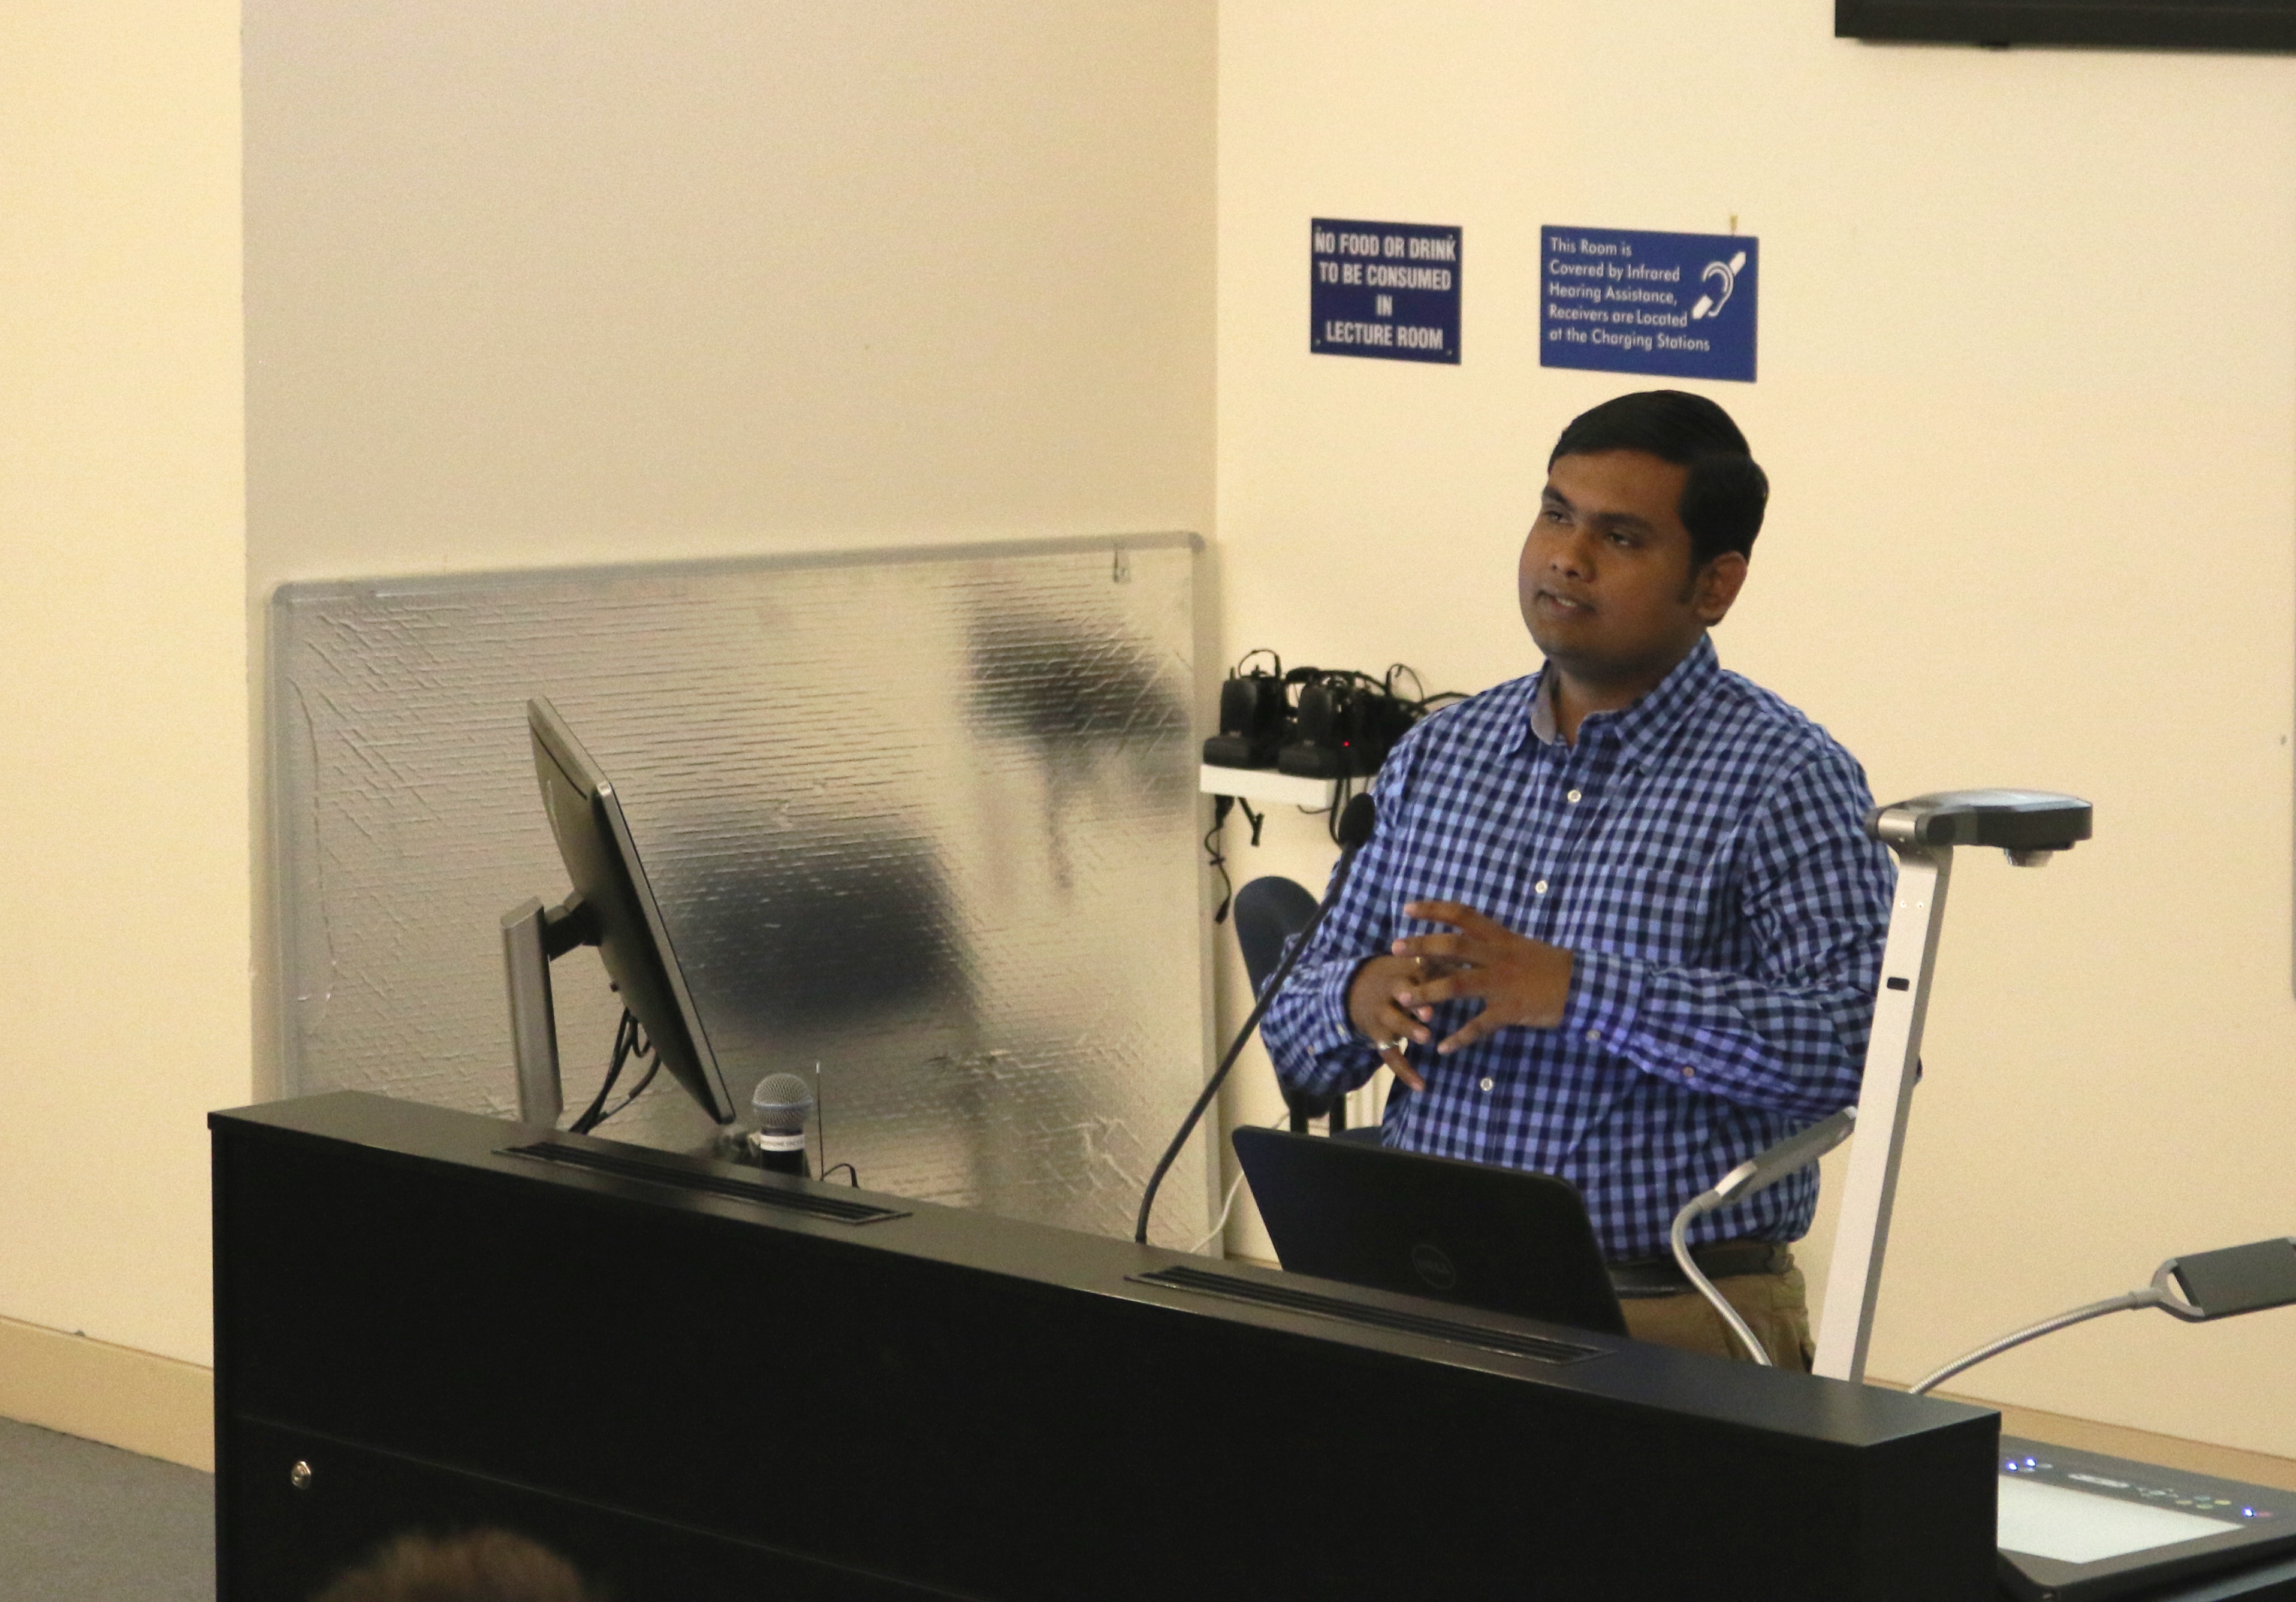 Kiran Wagh delivers his WRS presentation in a UC lecture theatre